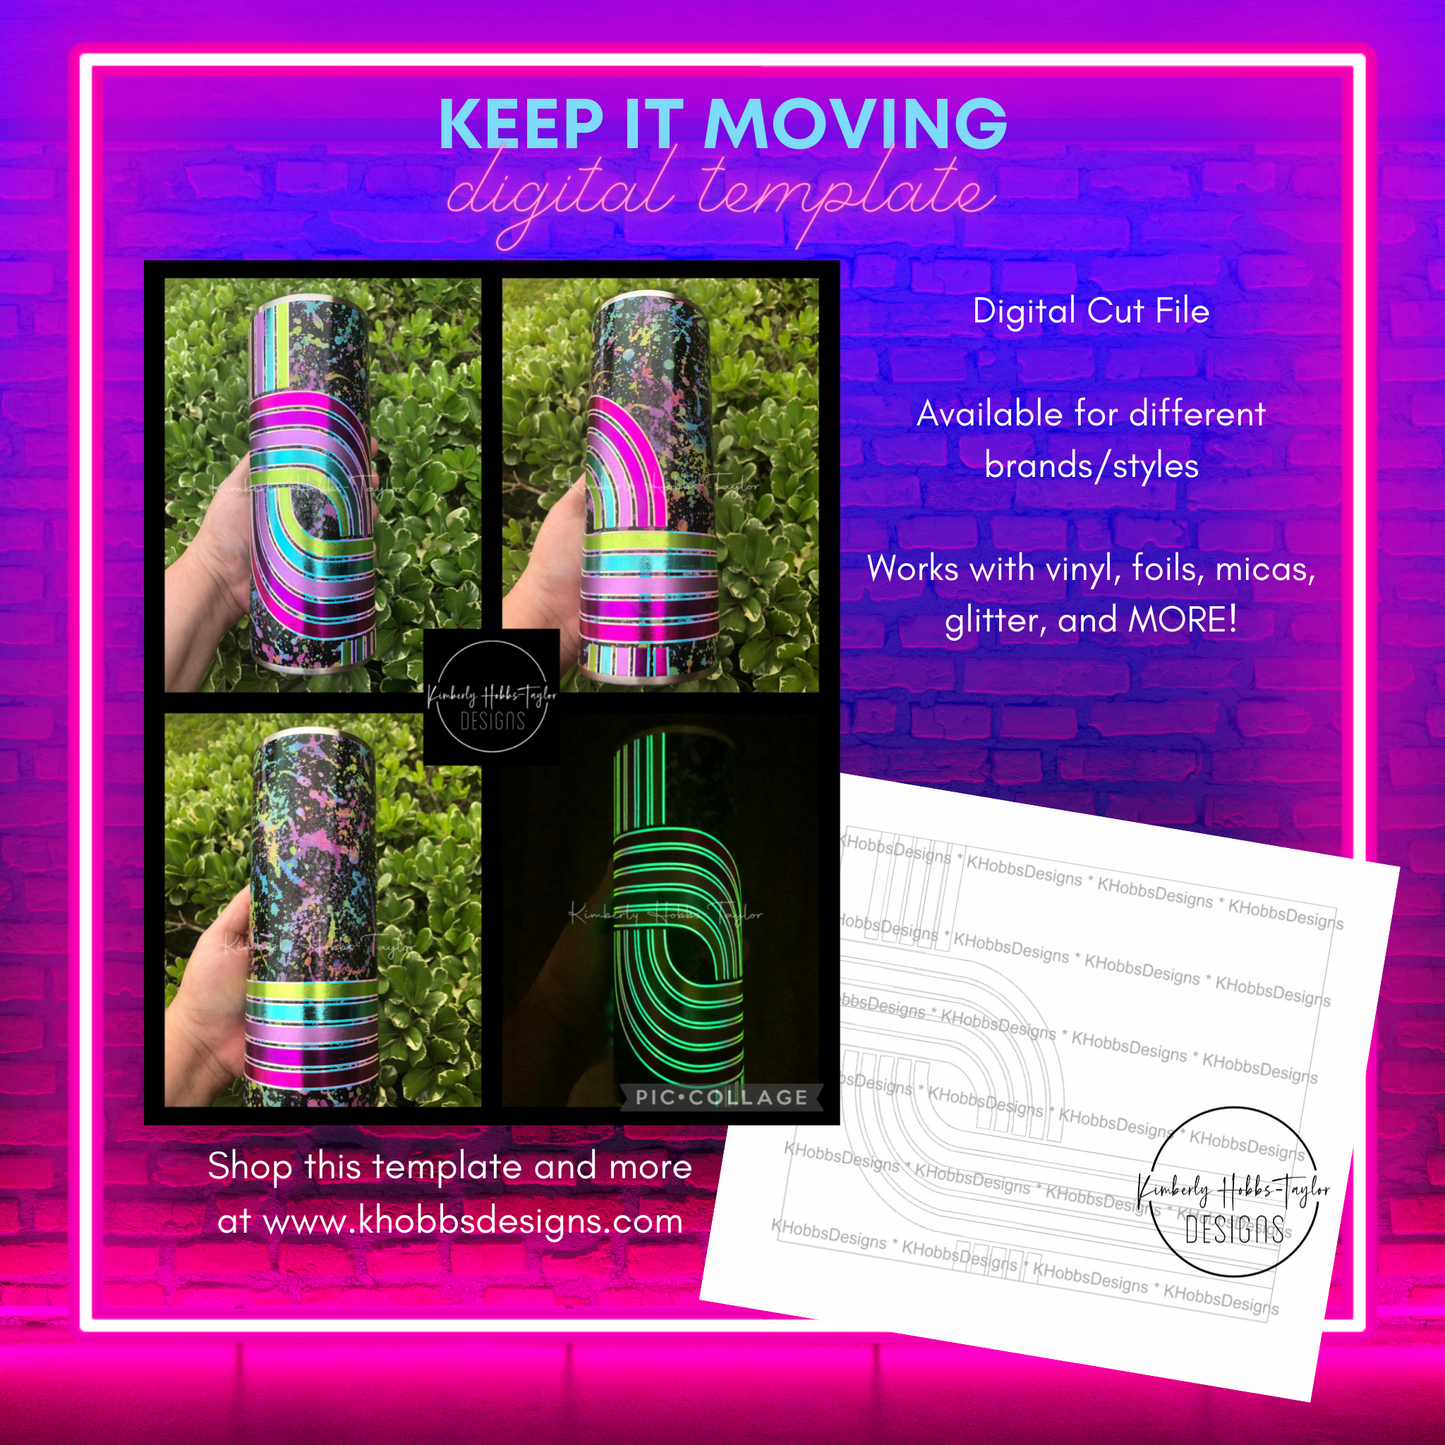 Keep It Moving Template for TSM 32 Plump - Digital Cut File Only